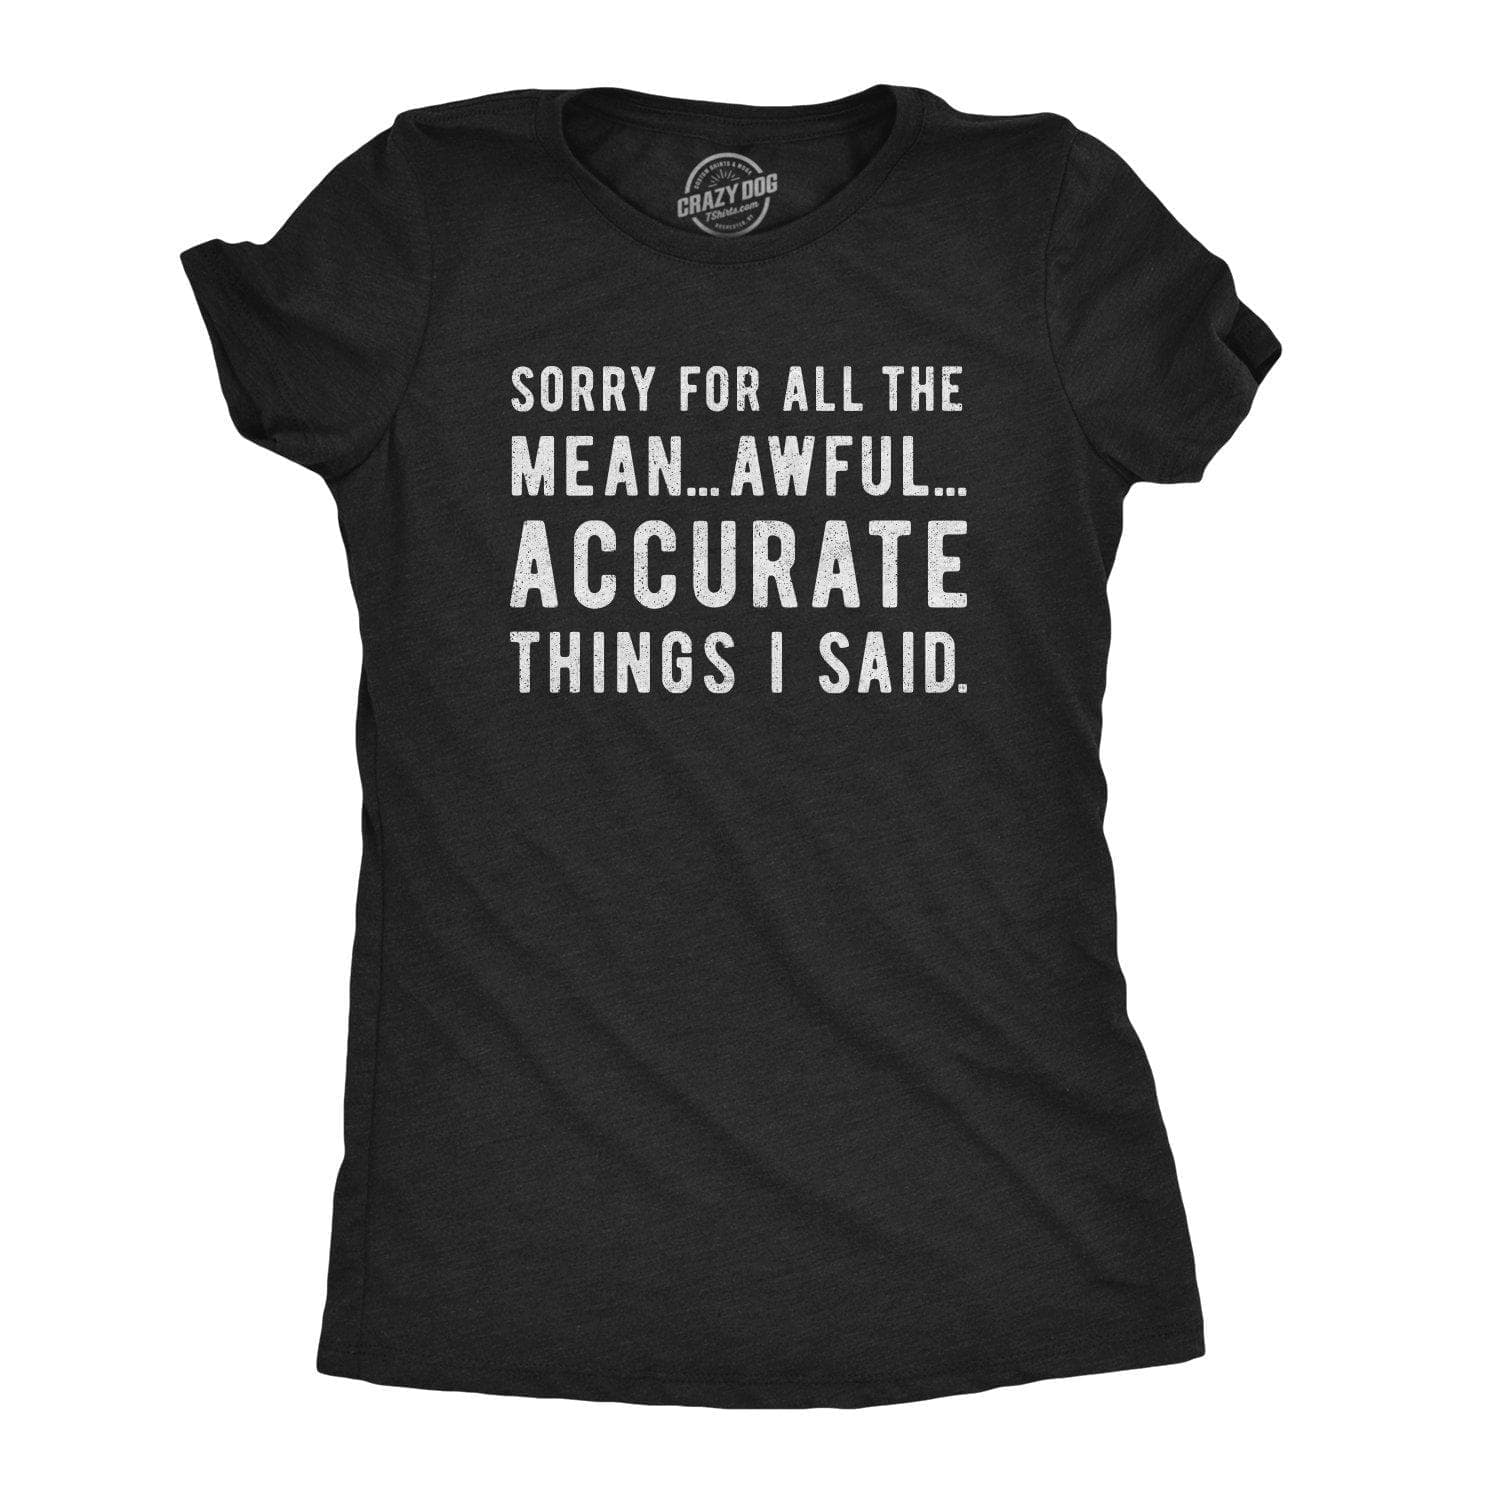 Sorry For All The Mean Awful Accurate Things I Said Women's Tshirt - Crazy Dog T-Shirts